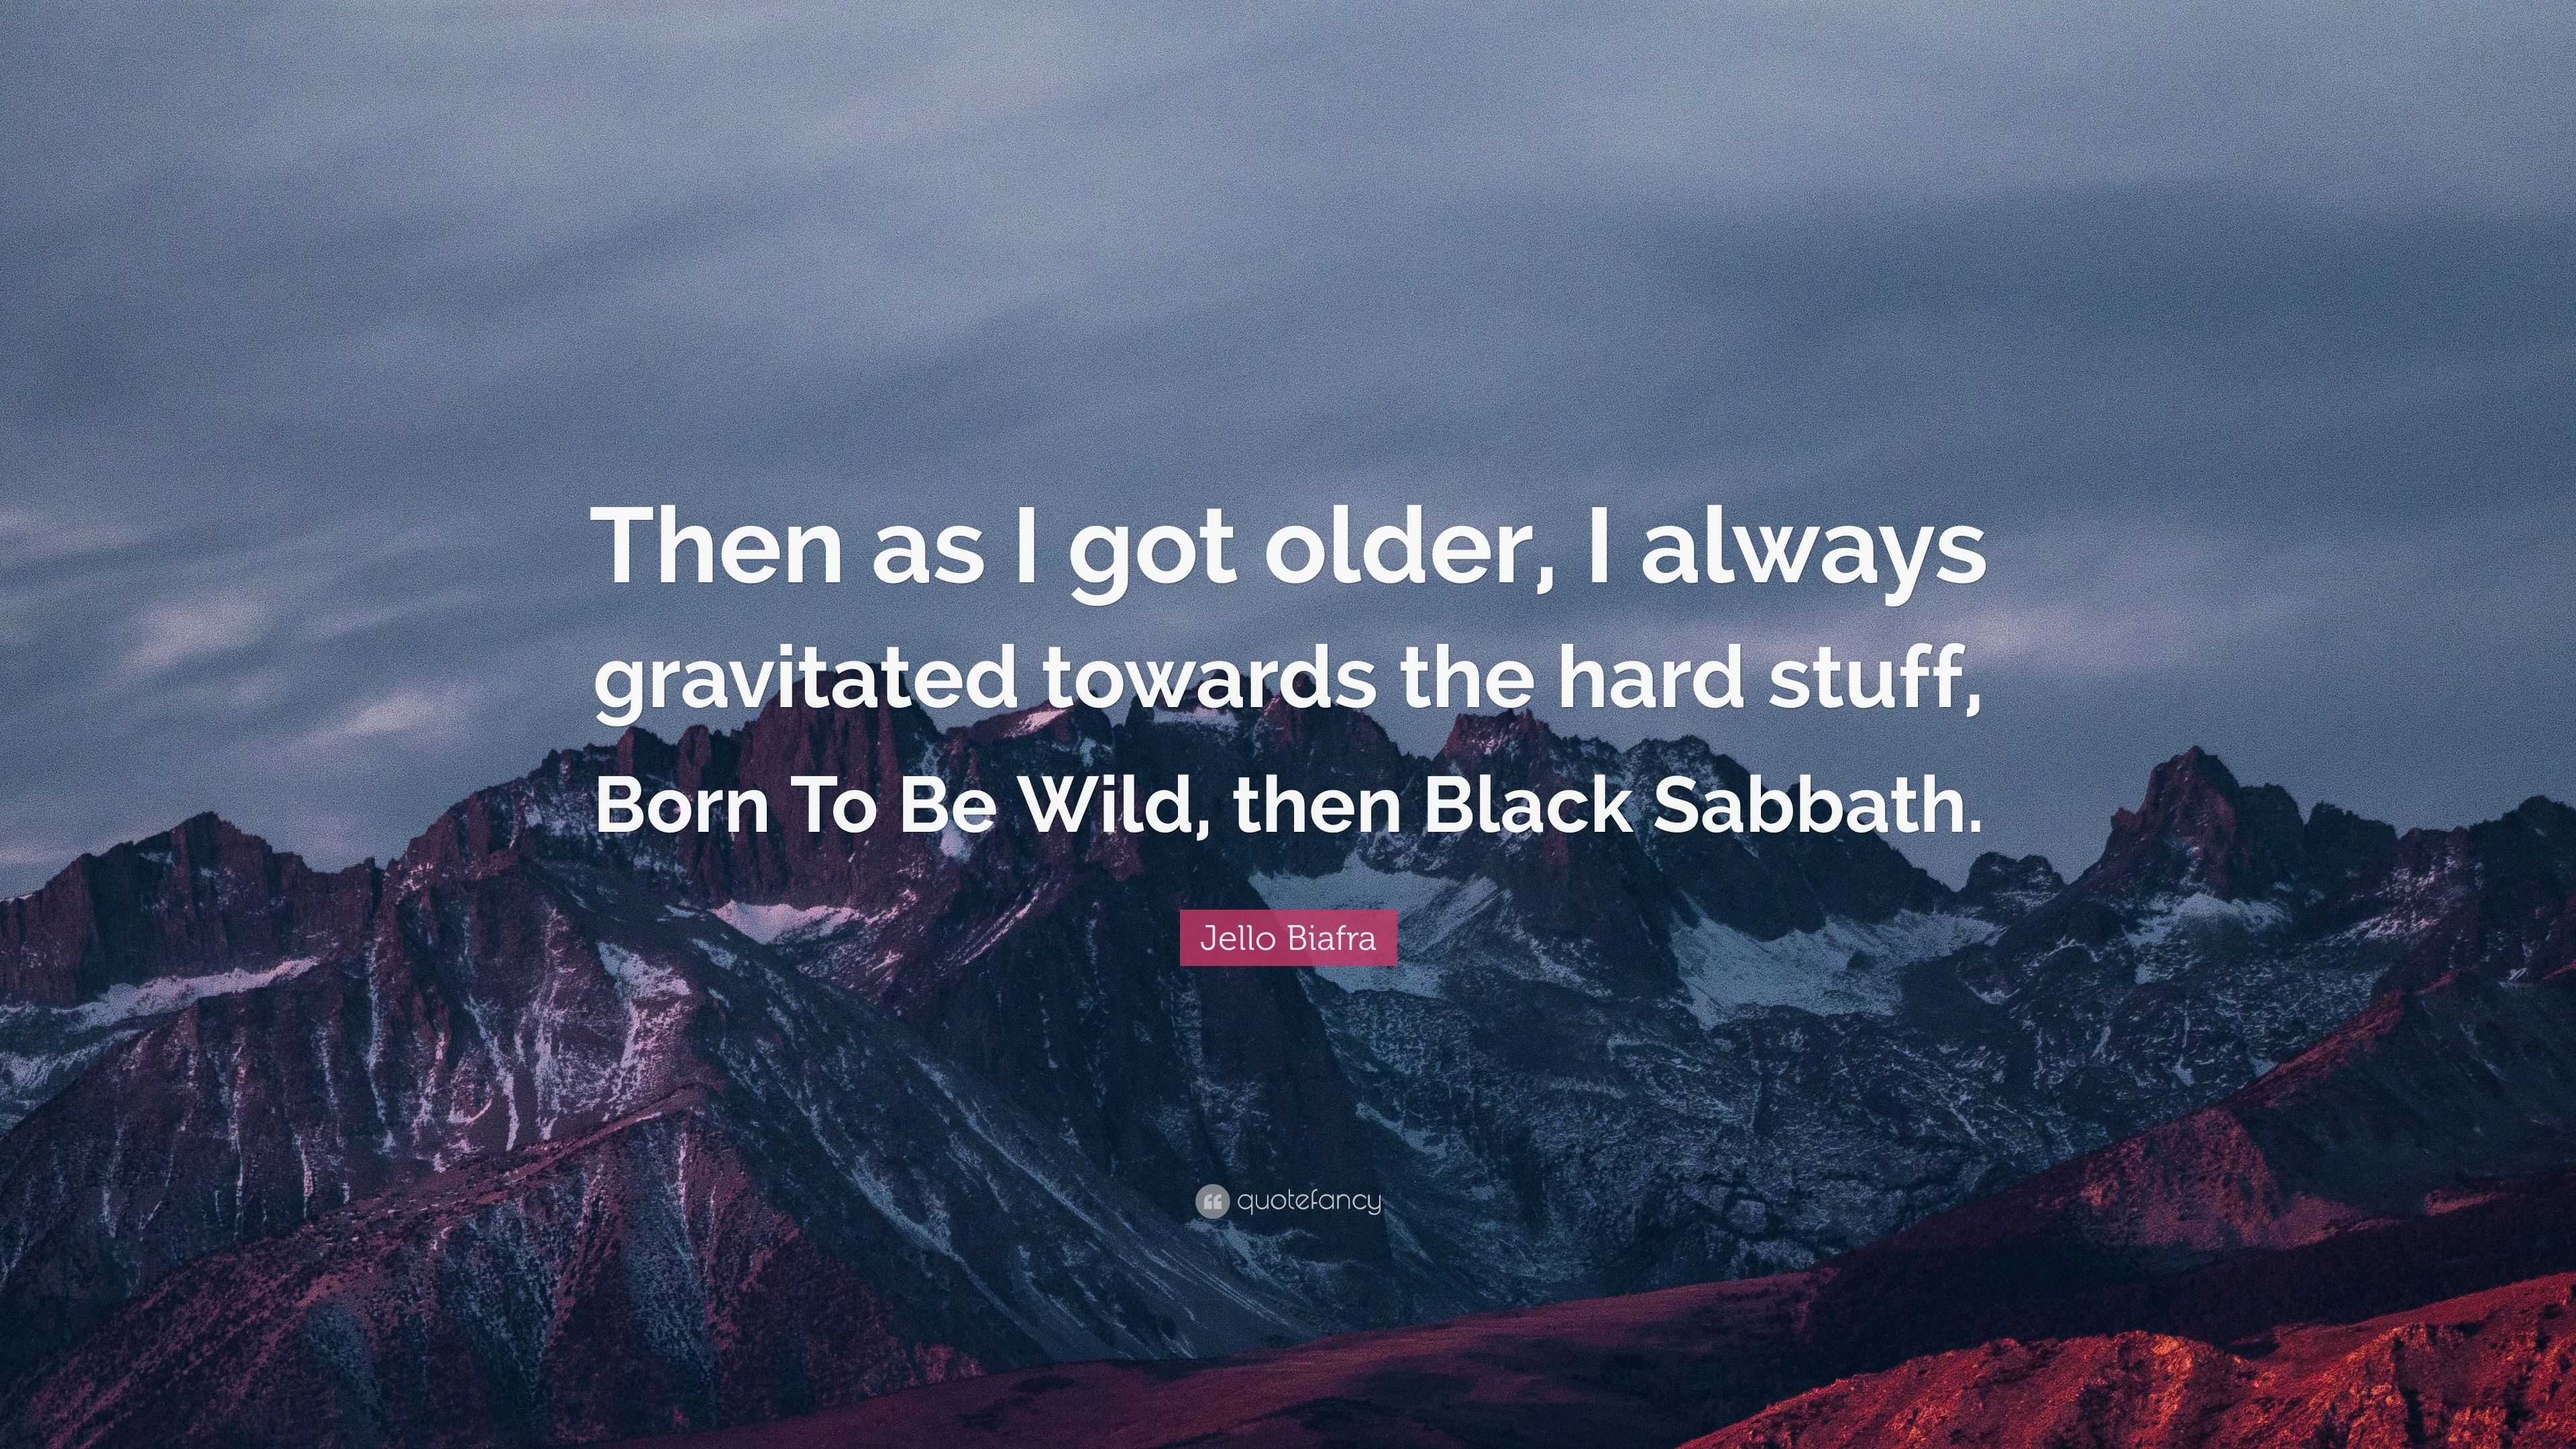 Jello Biafra Quote: “Then as I got older, I always gravitated towards ...